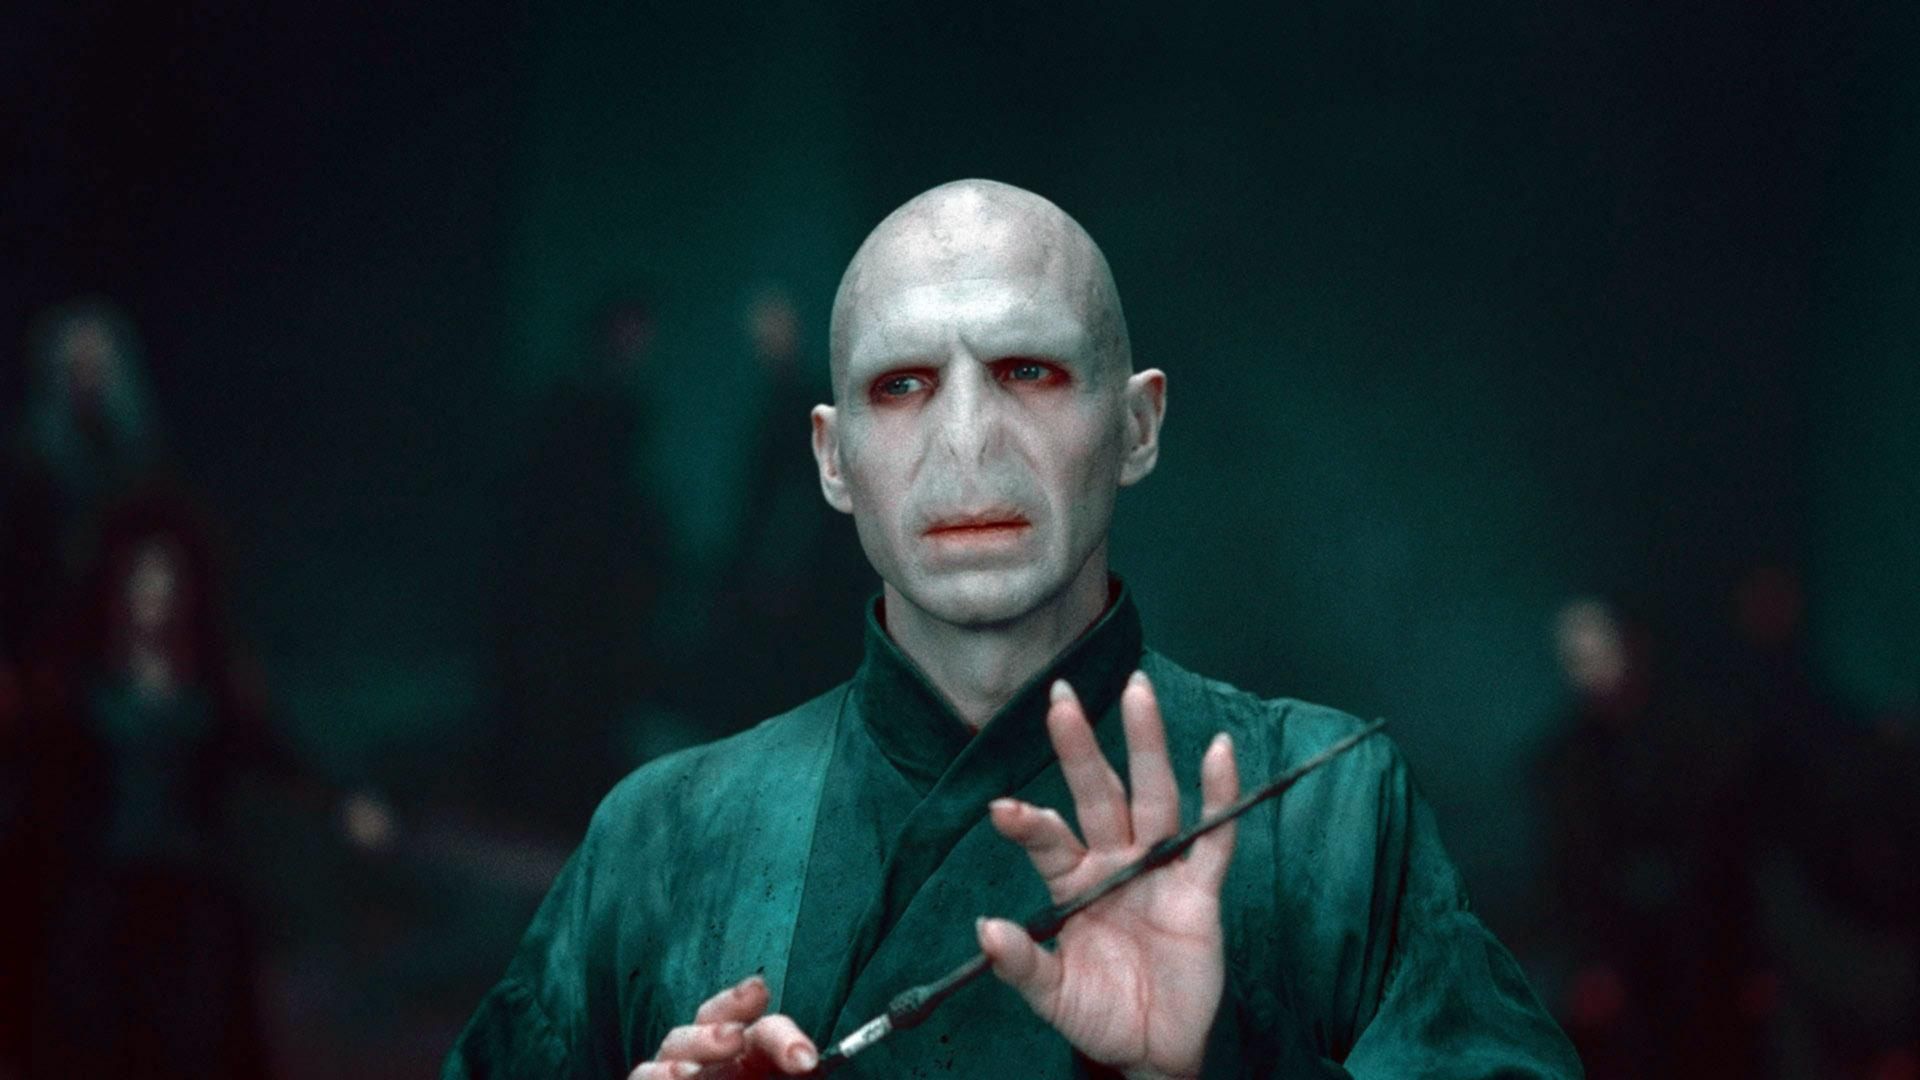 Ralph Fiennes as Lord Voldemort in Harry Potter and the Deathly Hallows, Part 2